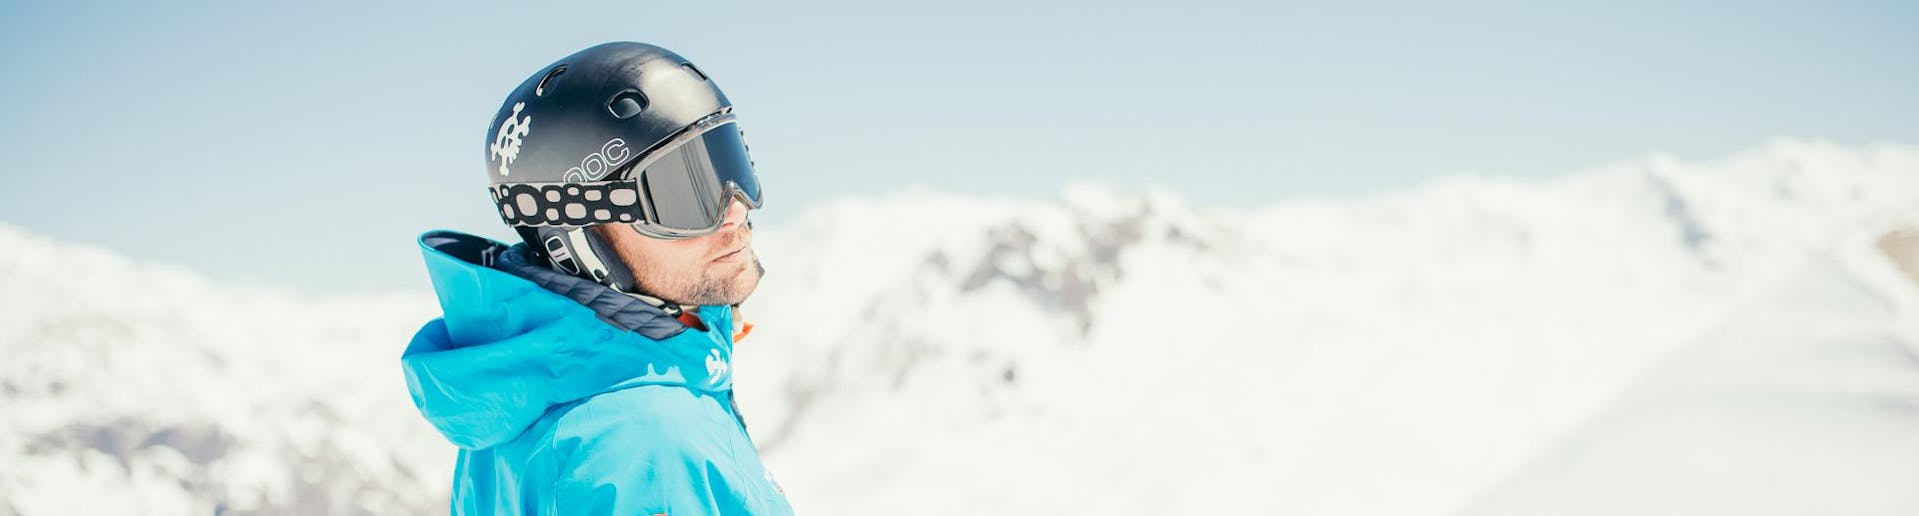 Adults are doing Adult Ski Lessons for All Levels with our partner Starski Grand Bornand.